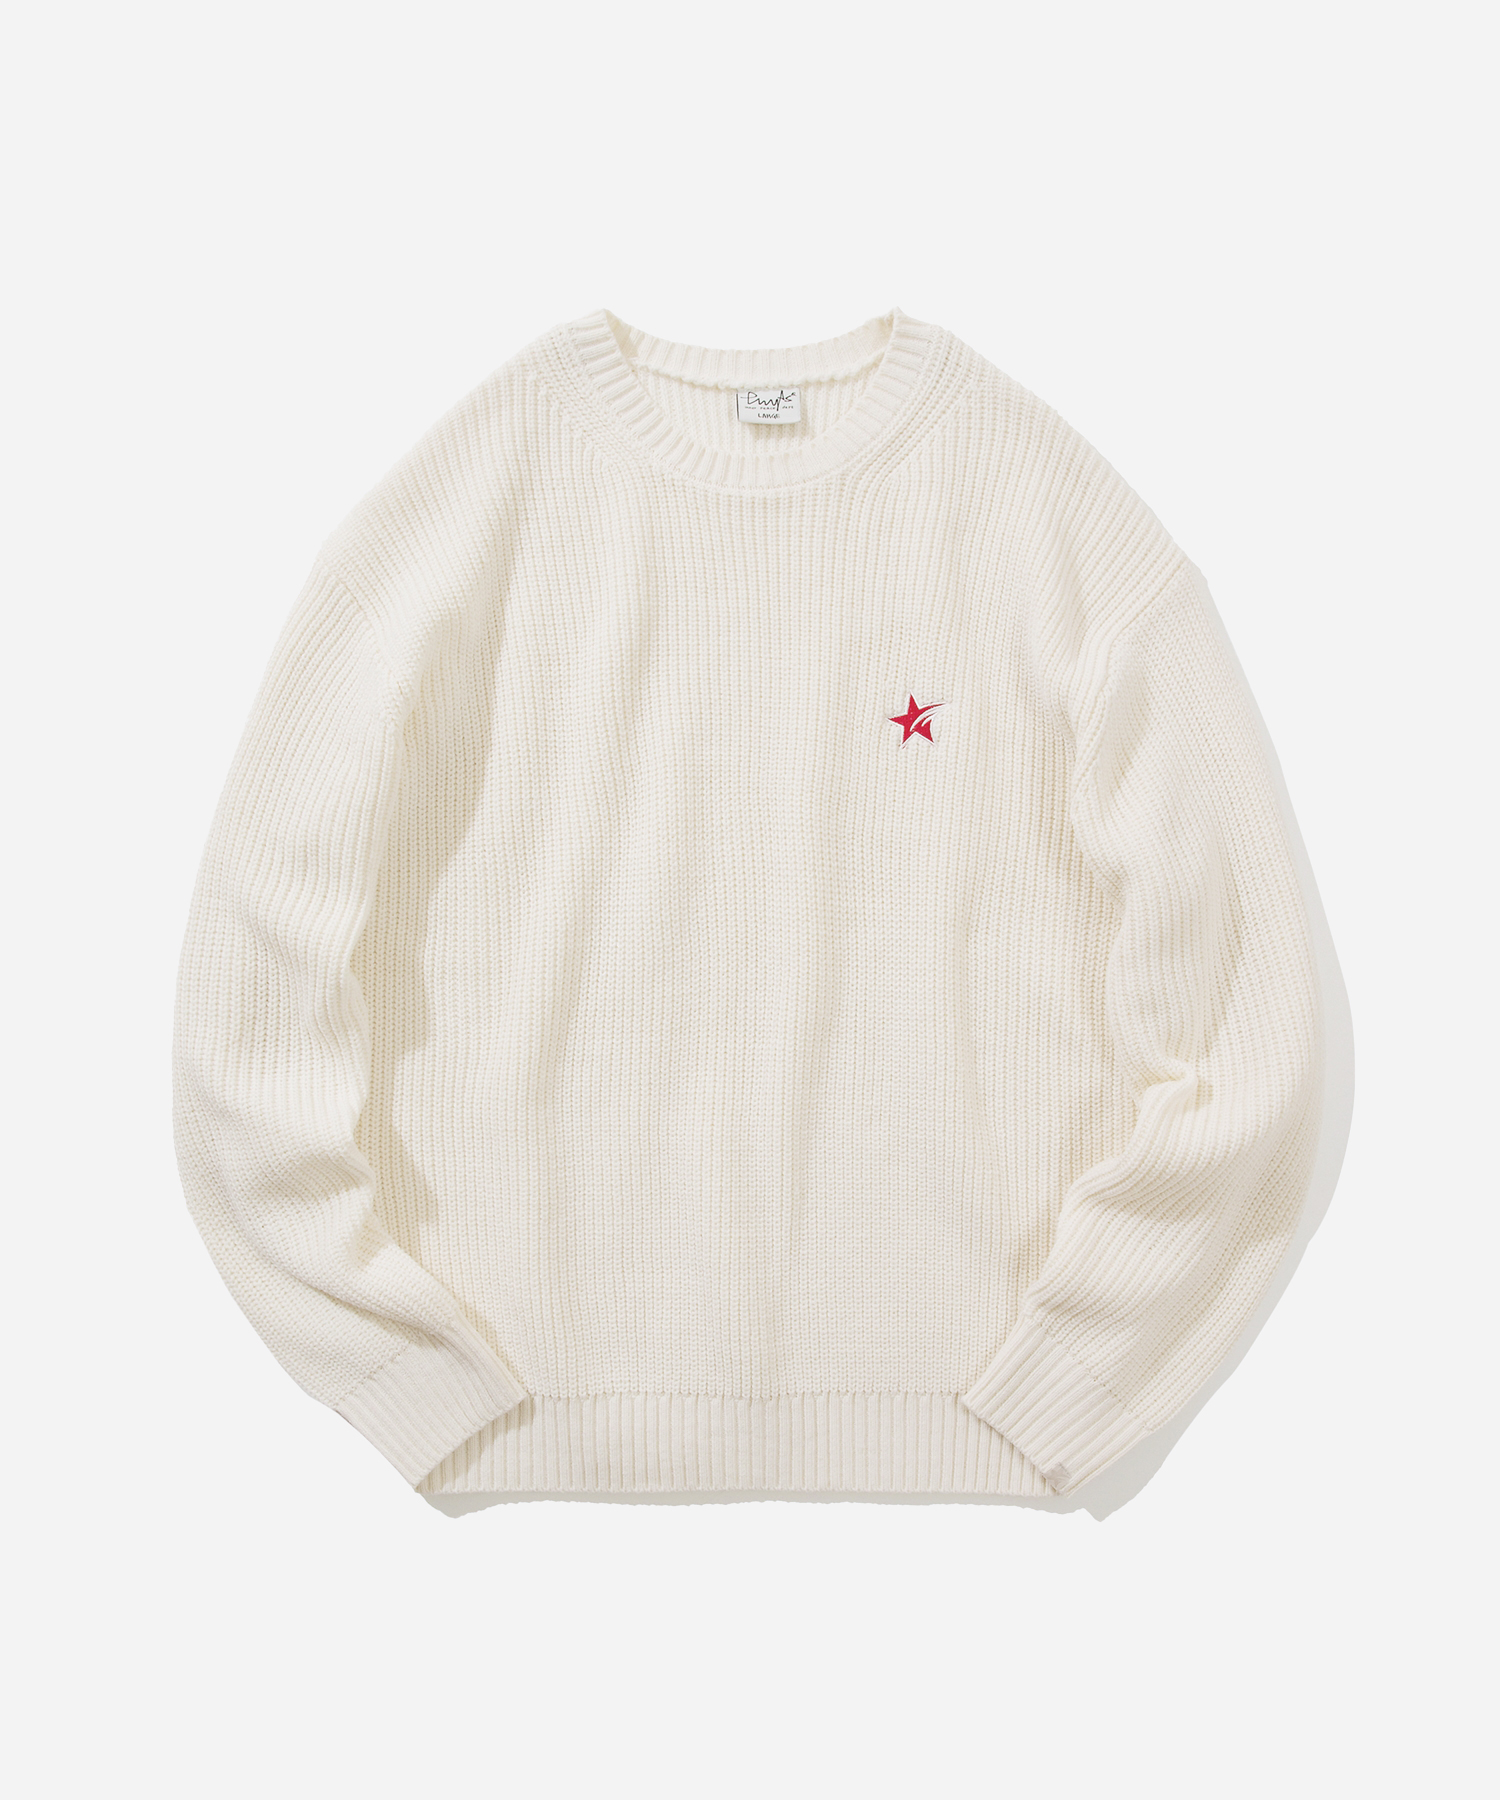 PHYPS® SMALL STARDUST KNIT IVORY